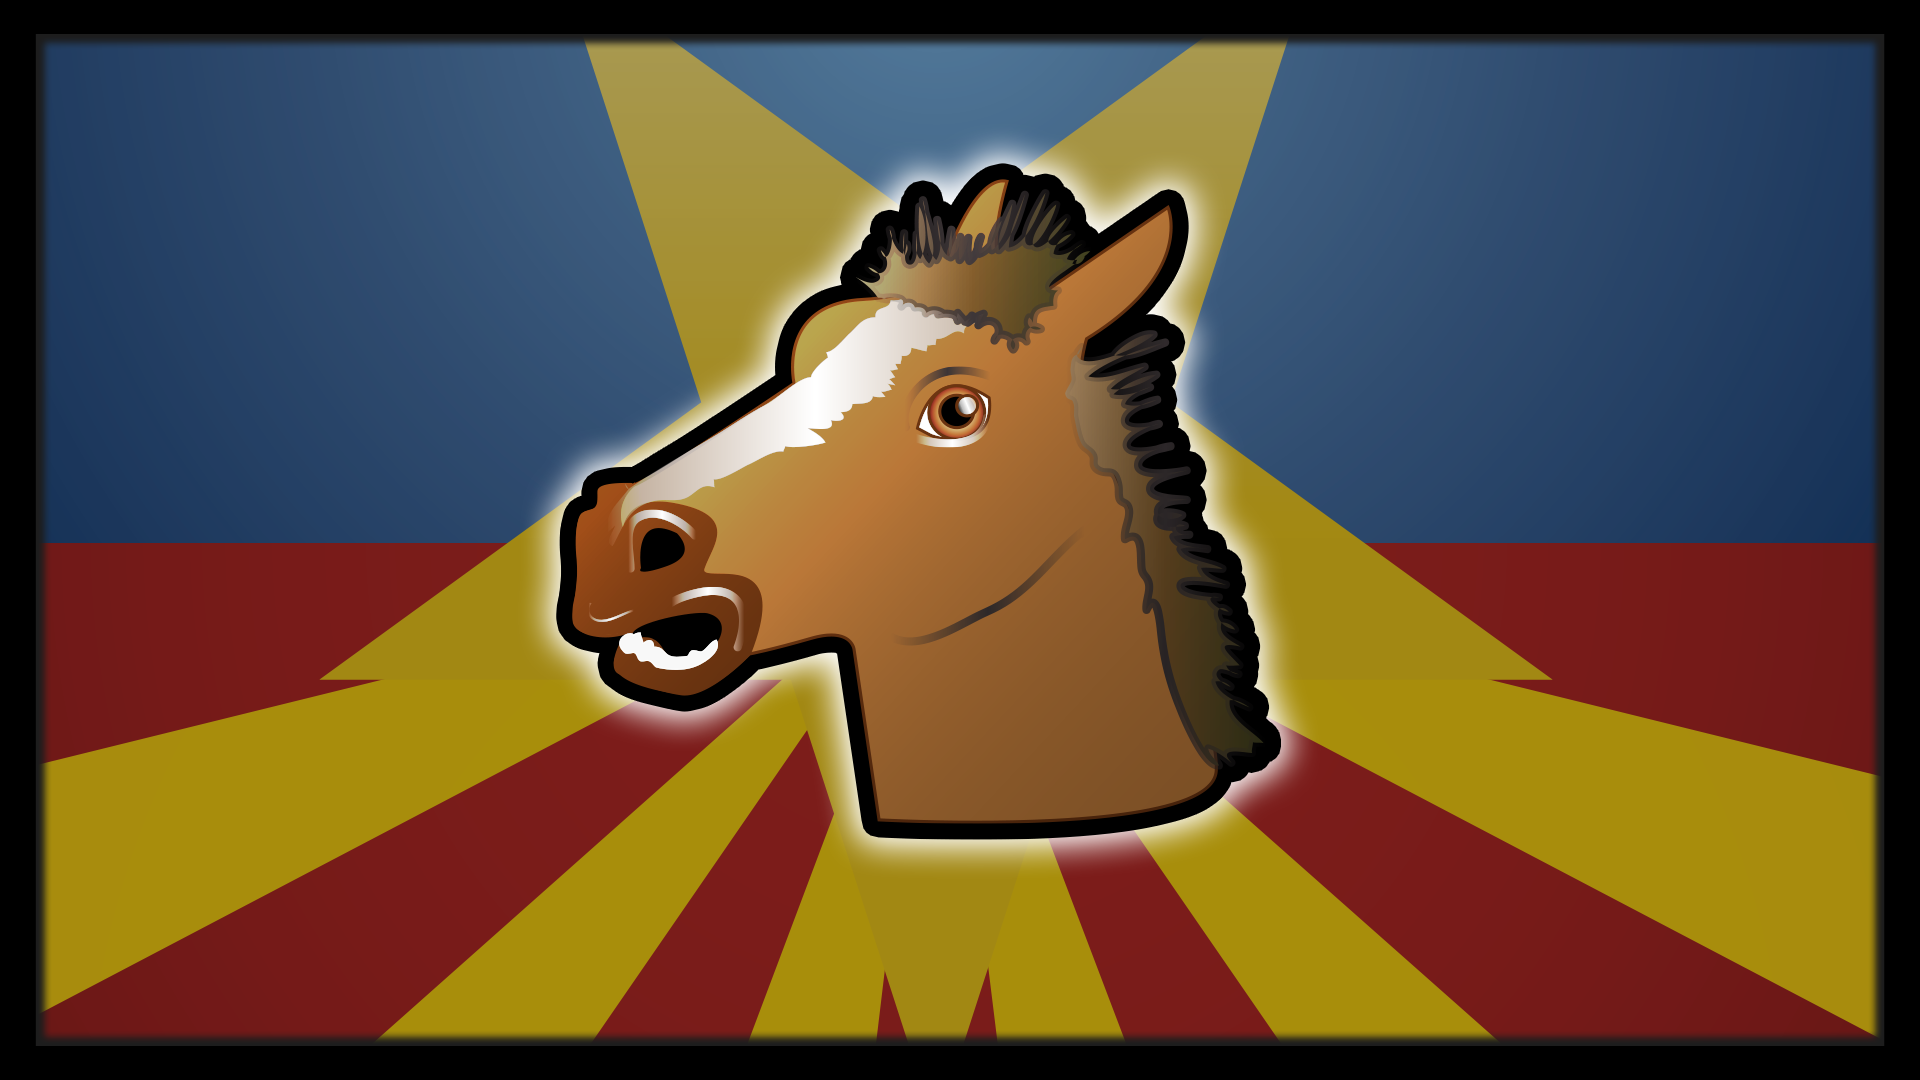 Icon for Charley Horse